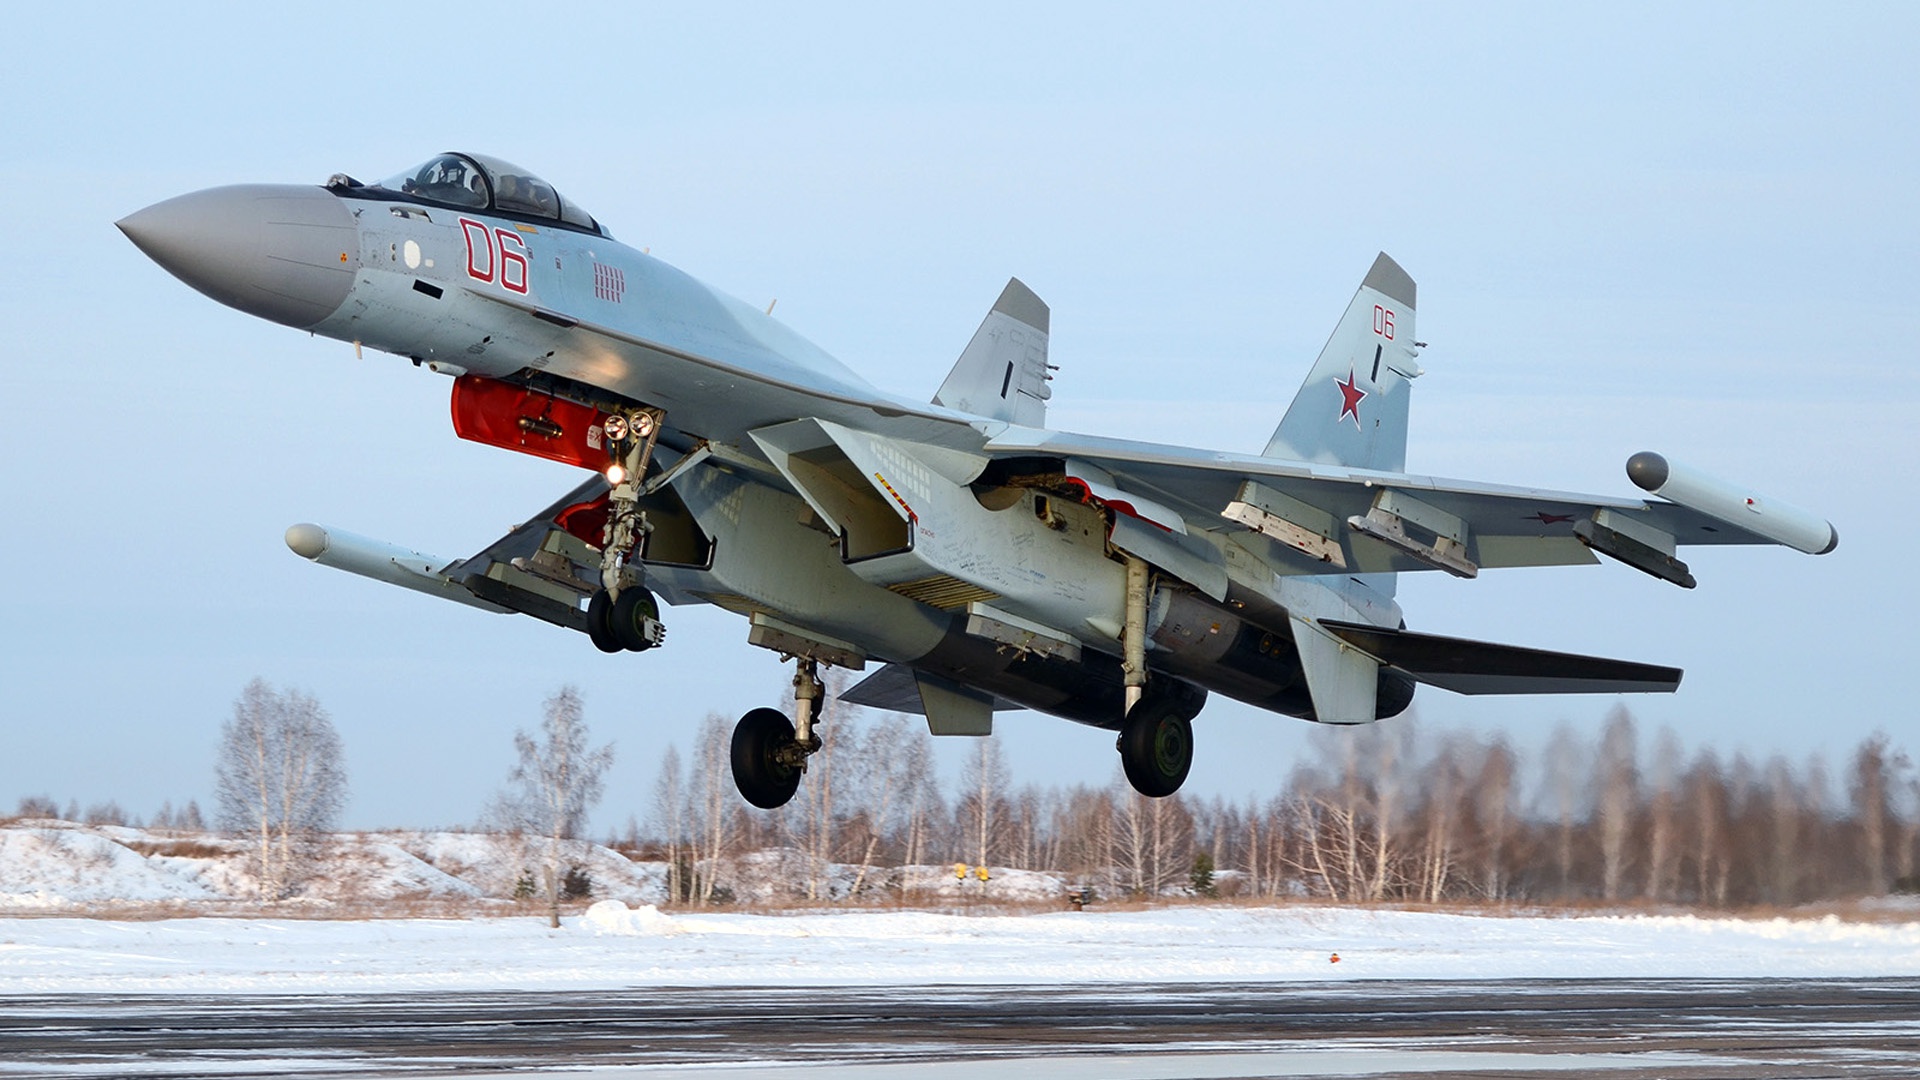 Su-35S, Sukhoi, the generation 4++fighter, Russian multipurpose highly mane...